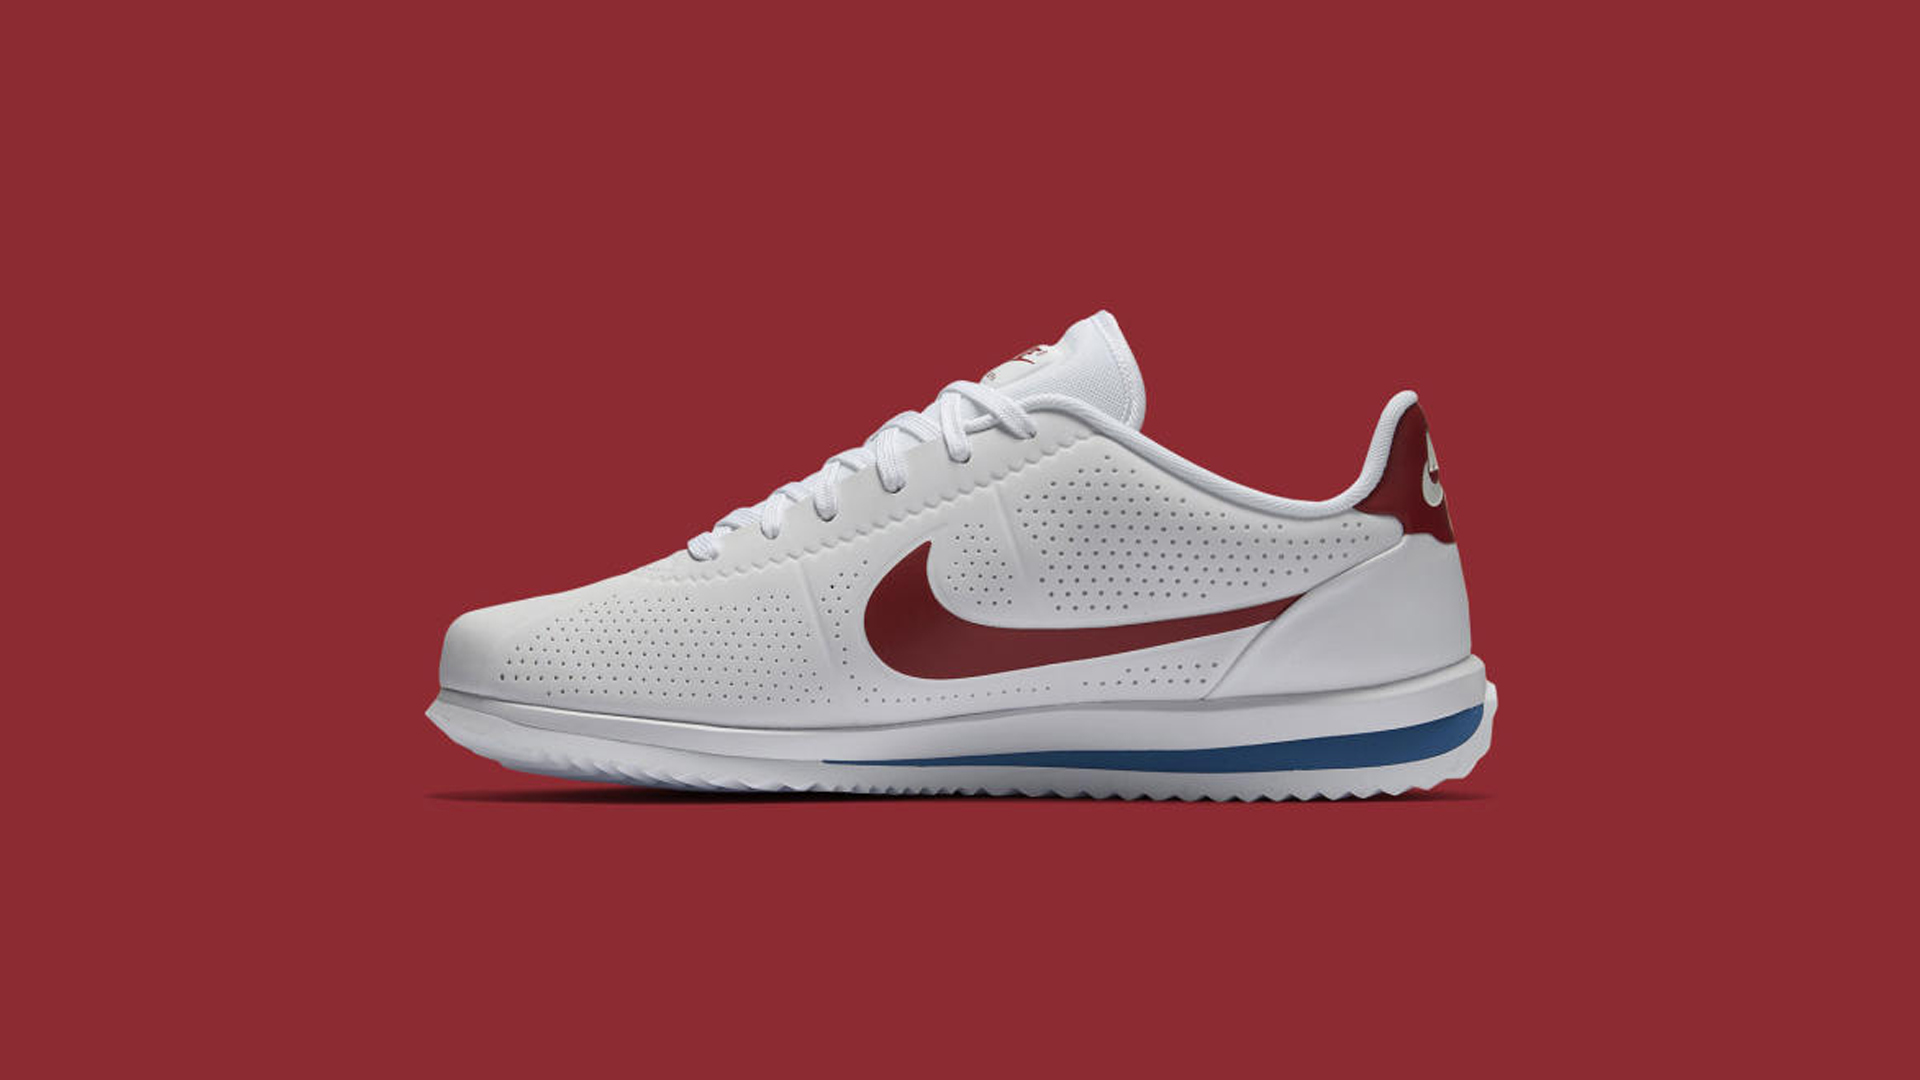 Nike Cortez Moire is for the Day Forrest Gump WearTesters